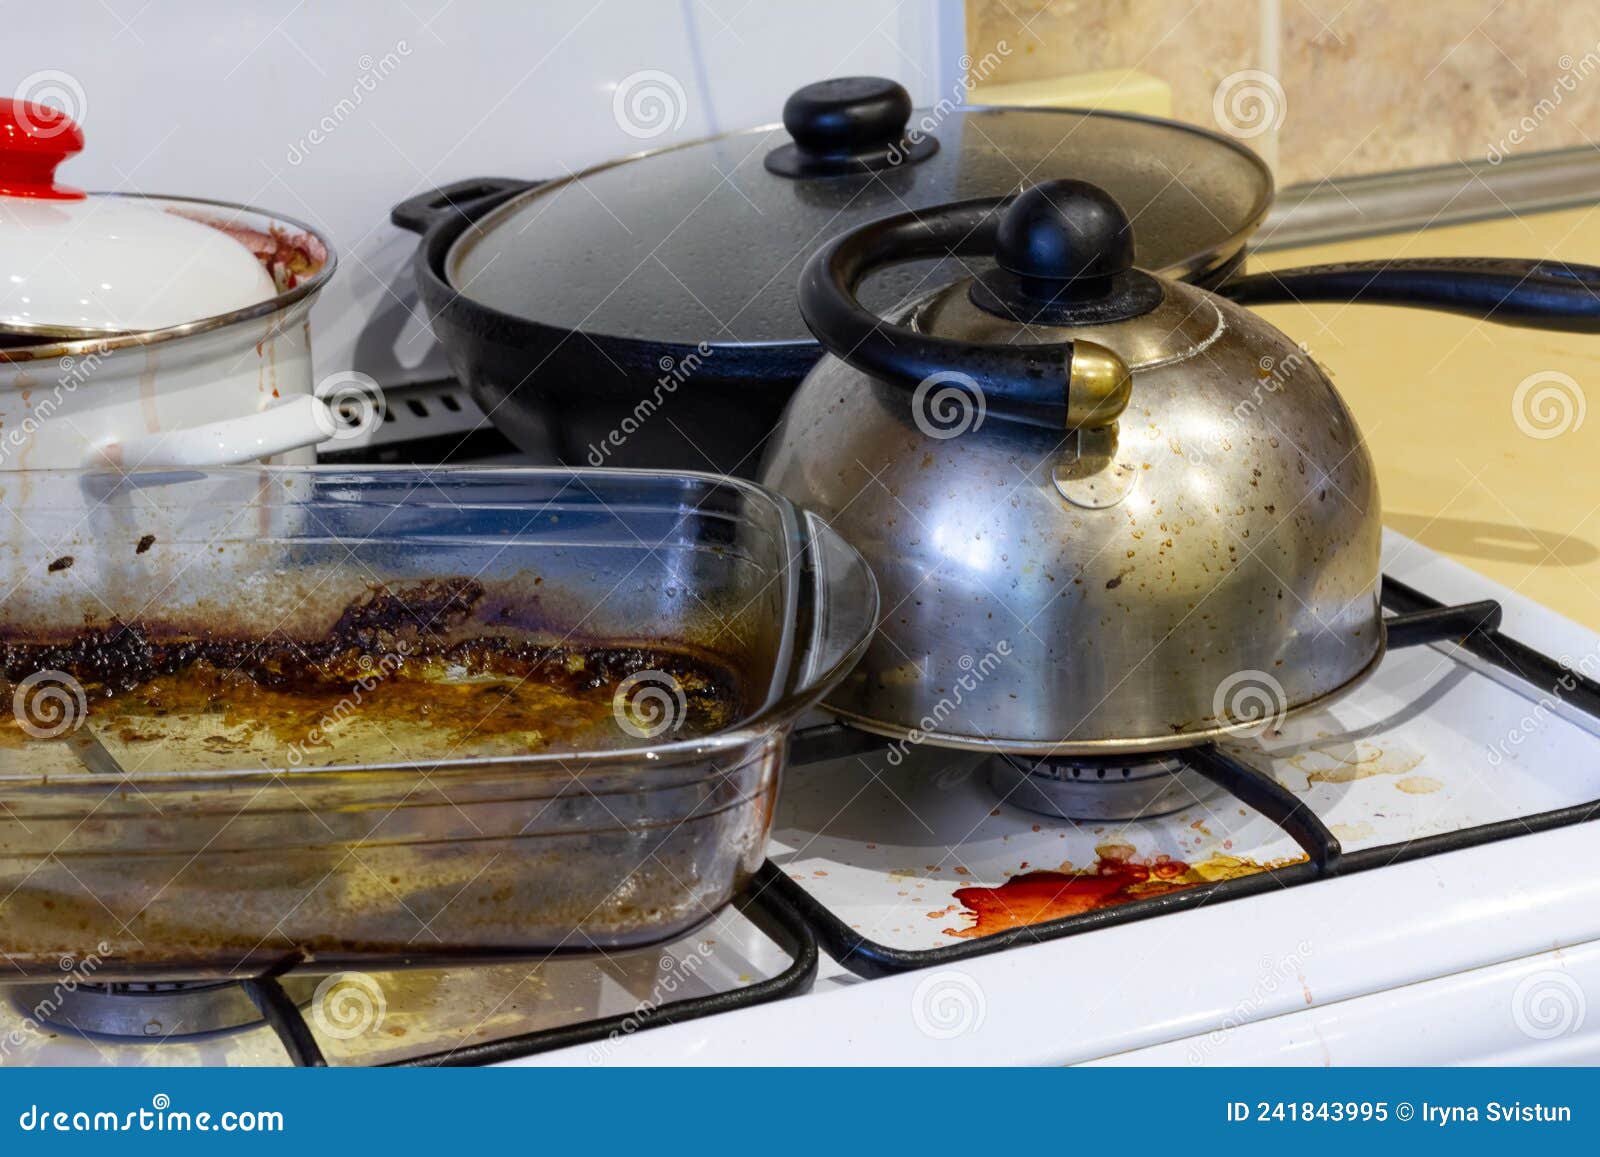 Dirty Gas Stove. Stove after Cooking. a Mess in the Kitchen Stock Image ...